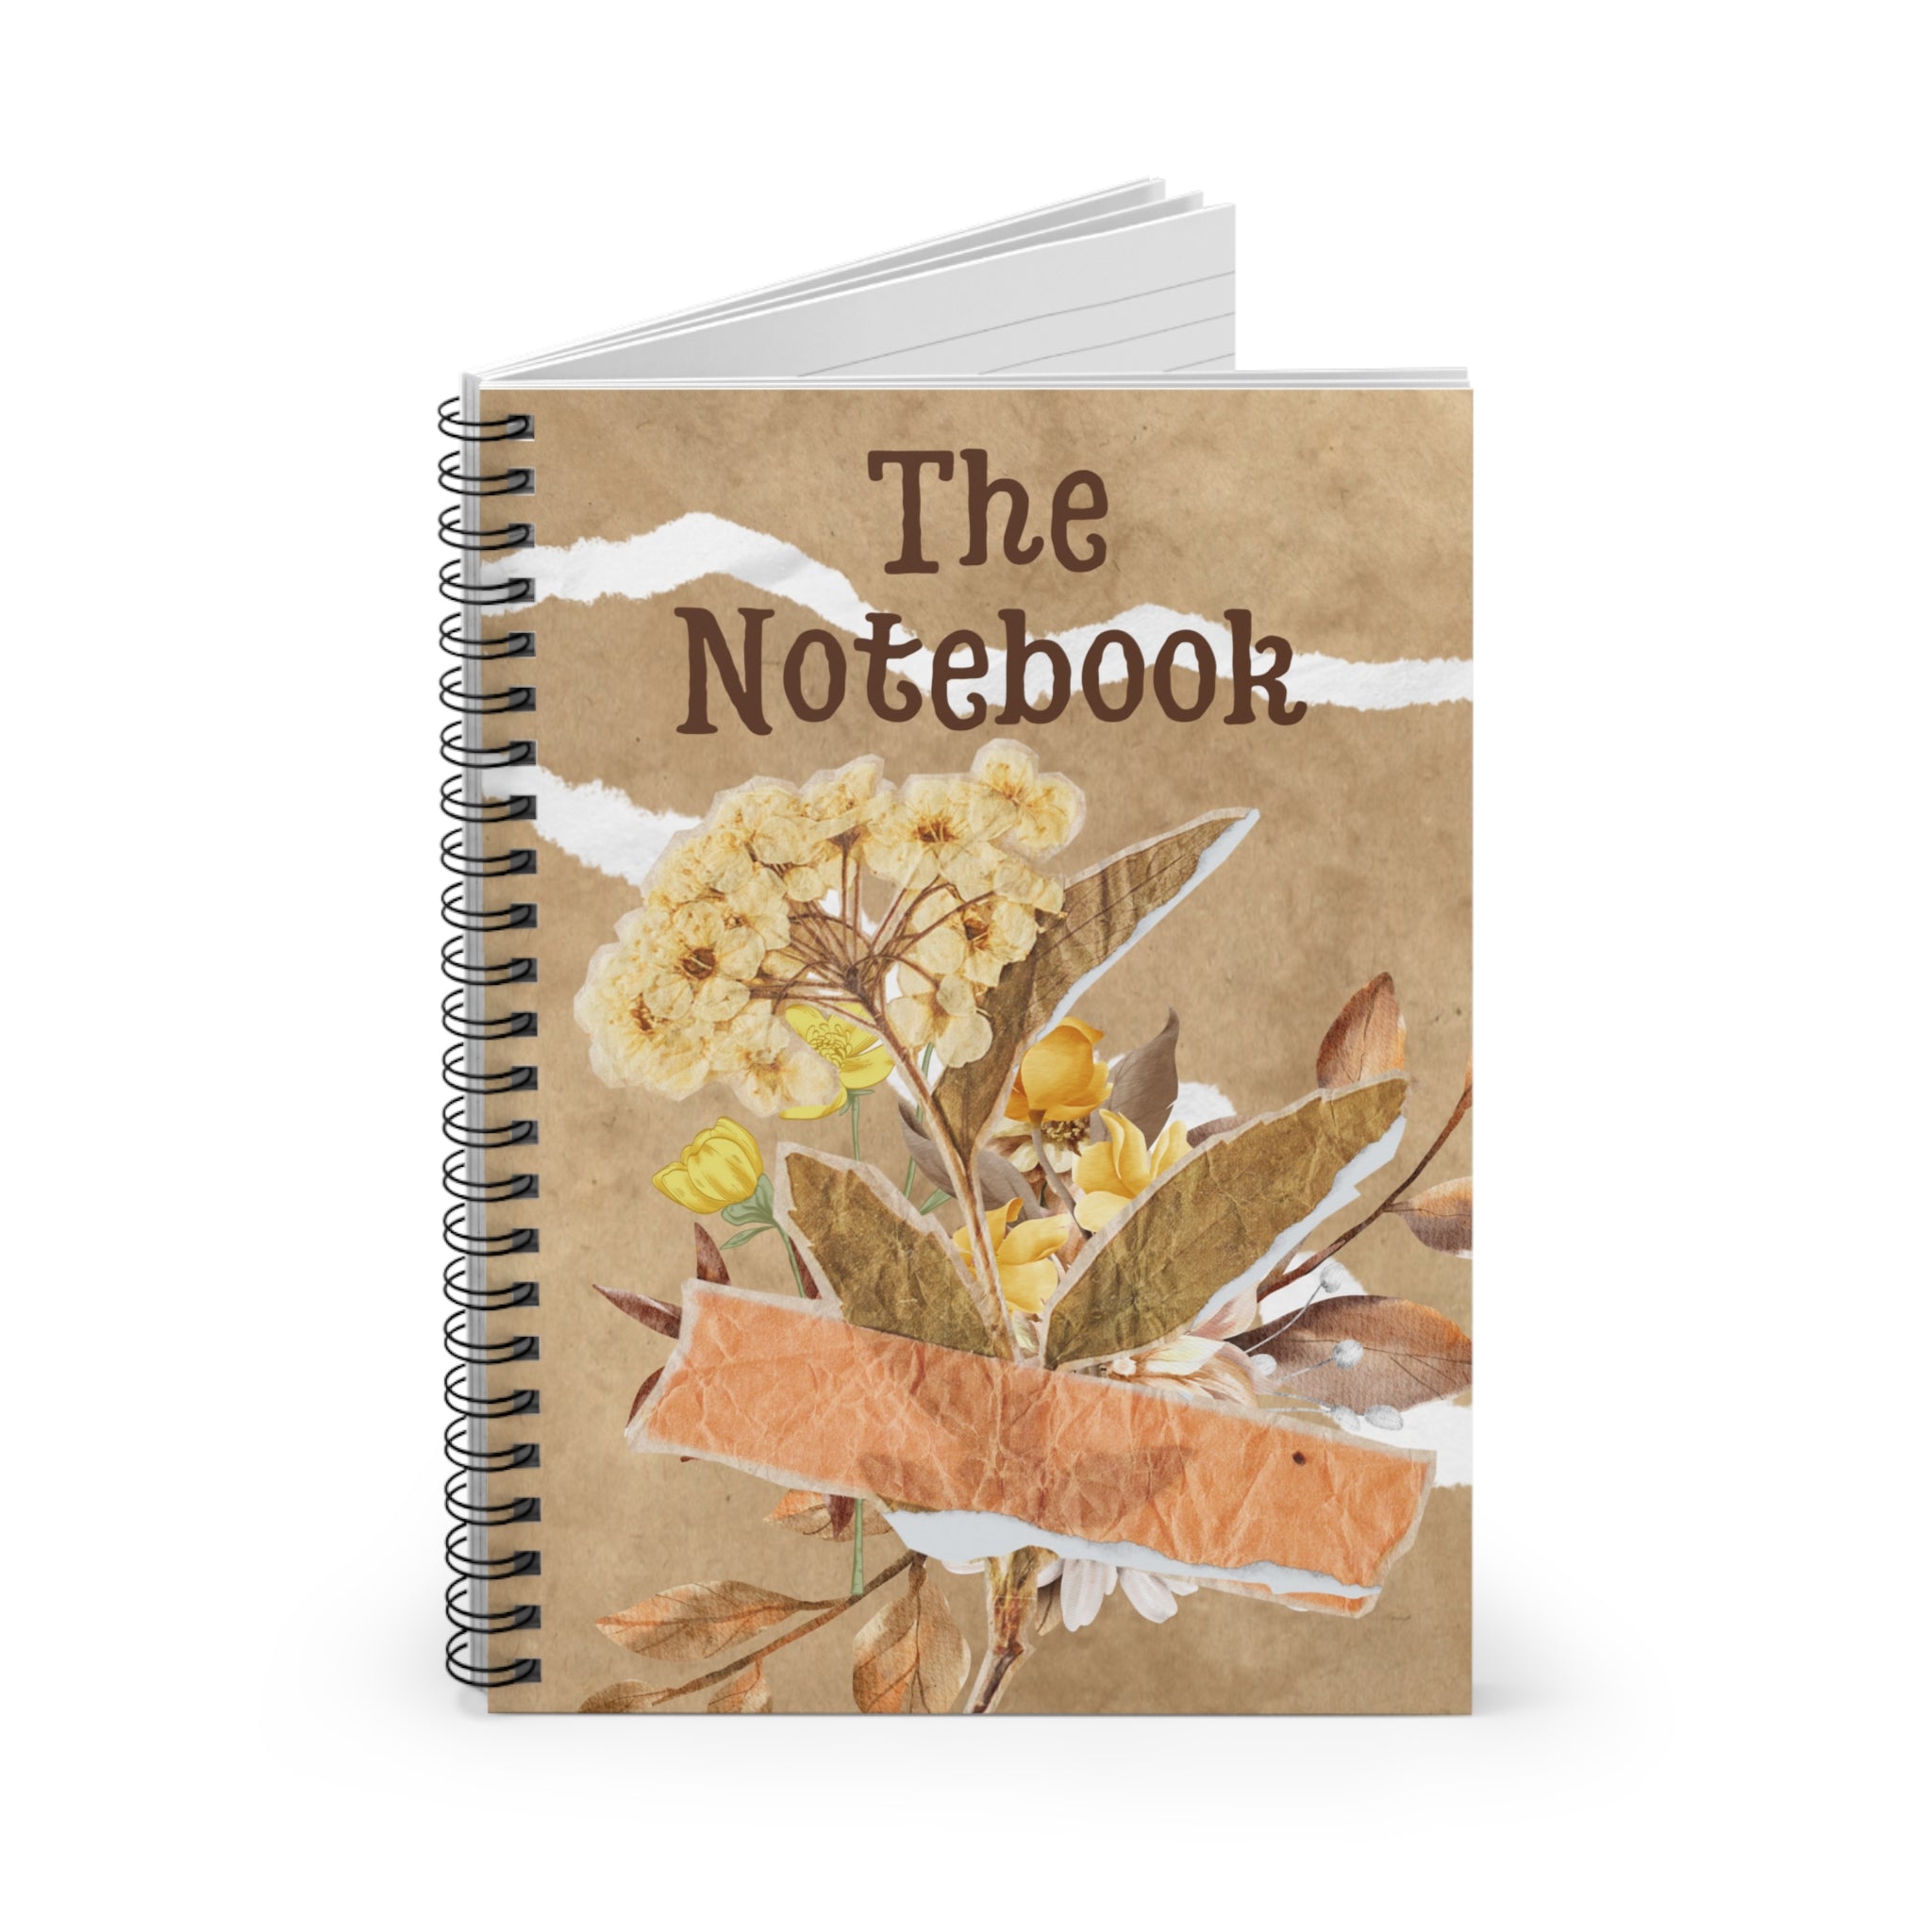 "The Notebook" Spiral Notebook - Ruled Line Paper products Krazy Heart Designs Boutique One Size  